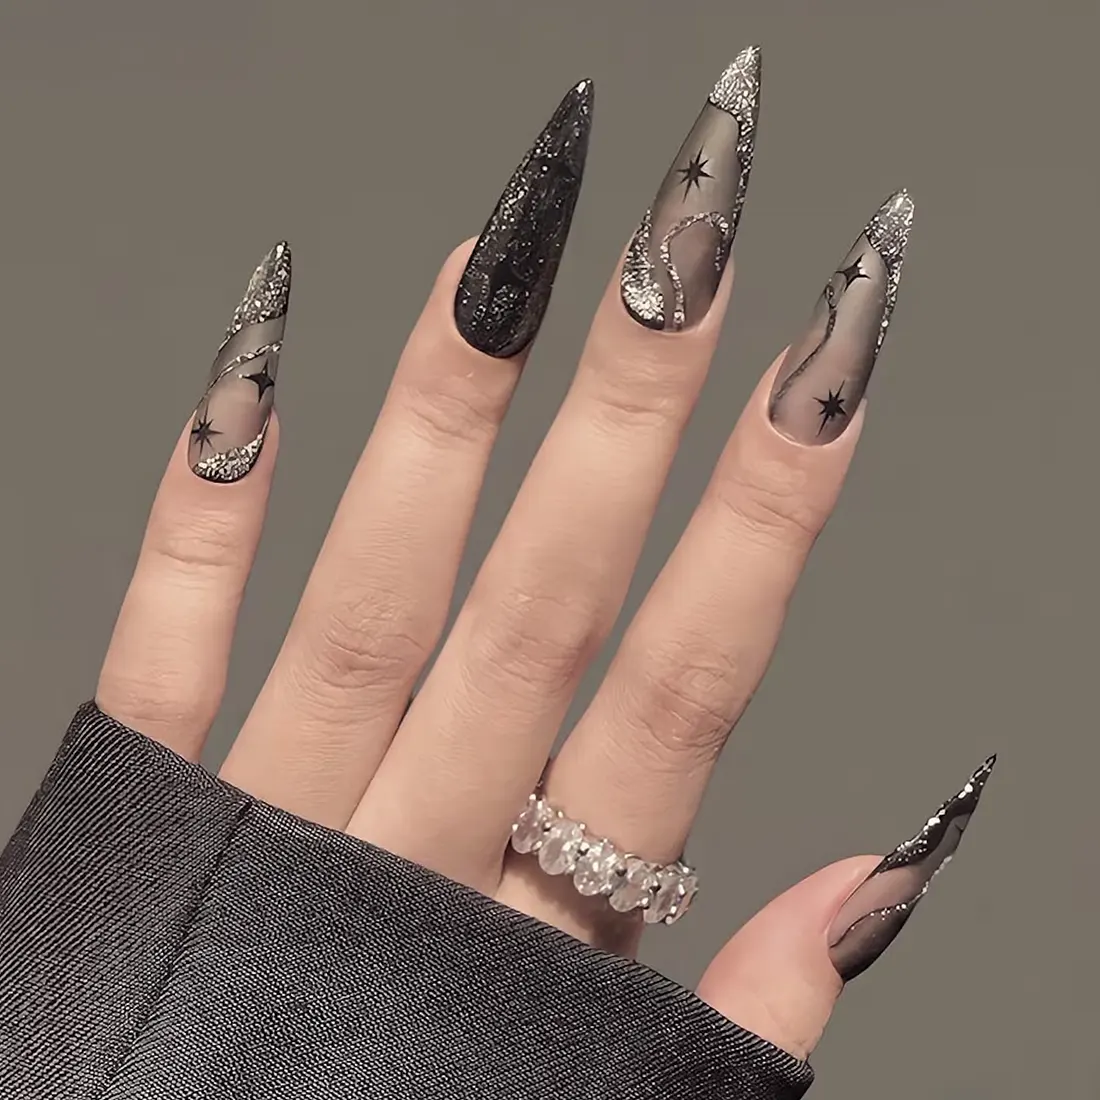 Closeup of long stiletto nails with black and silver star designs | 9 Witchy Nail Designs You Can Buy as Press-Ons on Etsy | Slashed Beauty